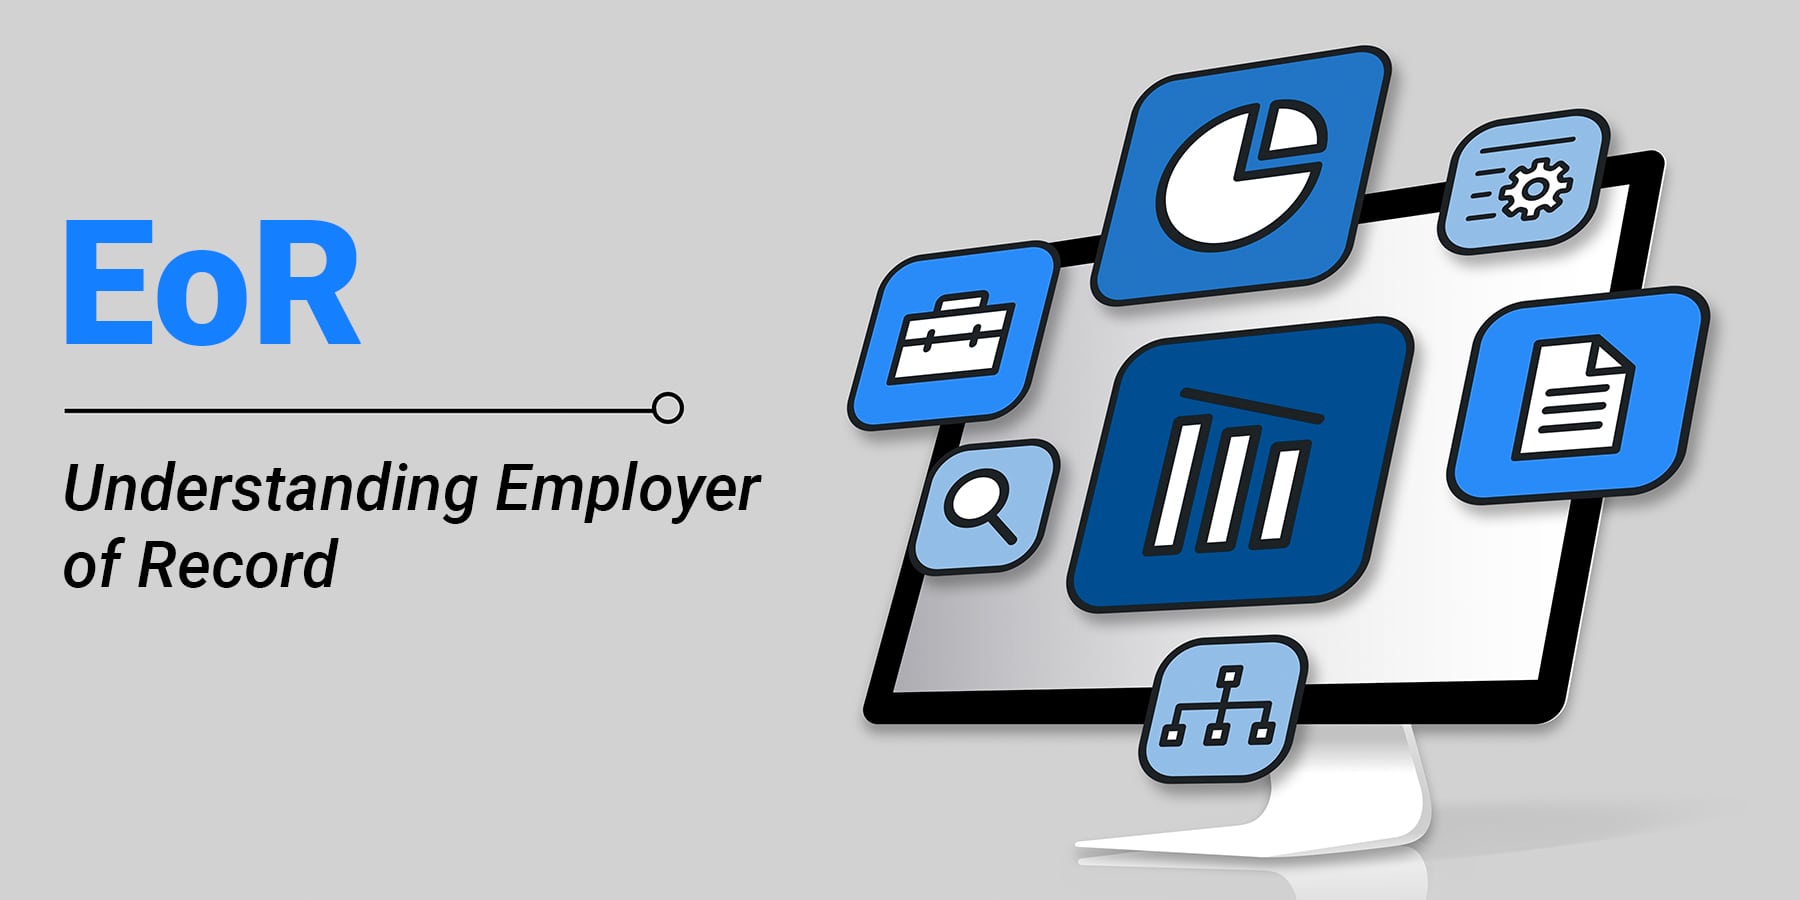 Leveraging on the Employer of Record for Your Remote Team